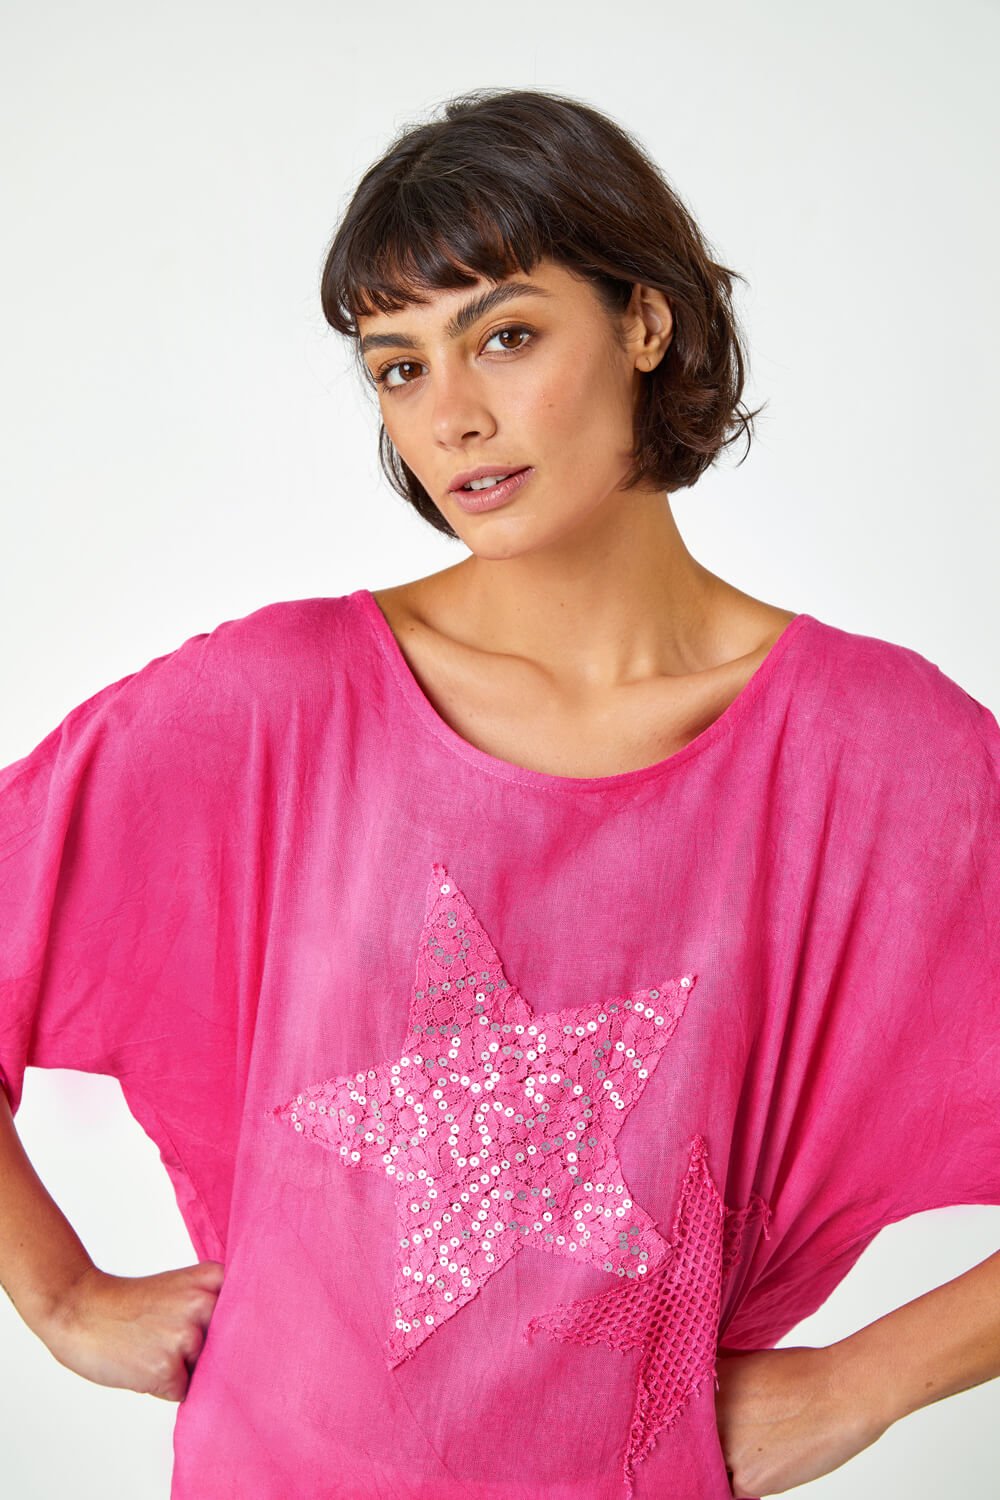 PINK Sequin Star Print Tunic Top , Image 4 of 5